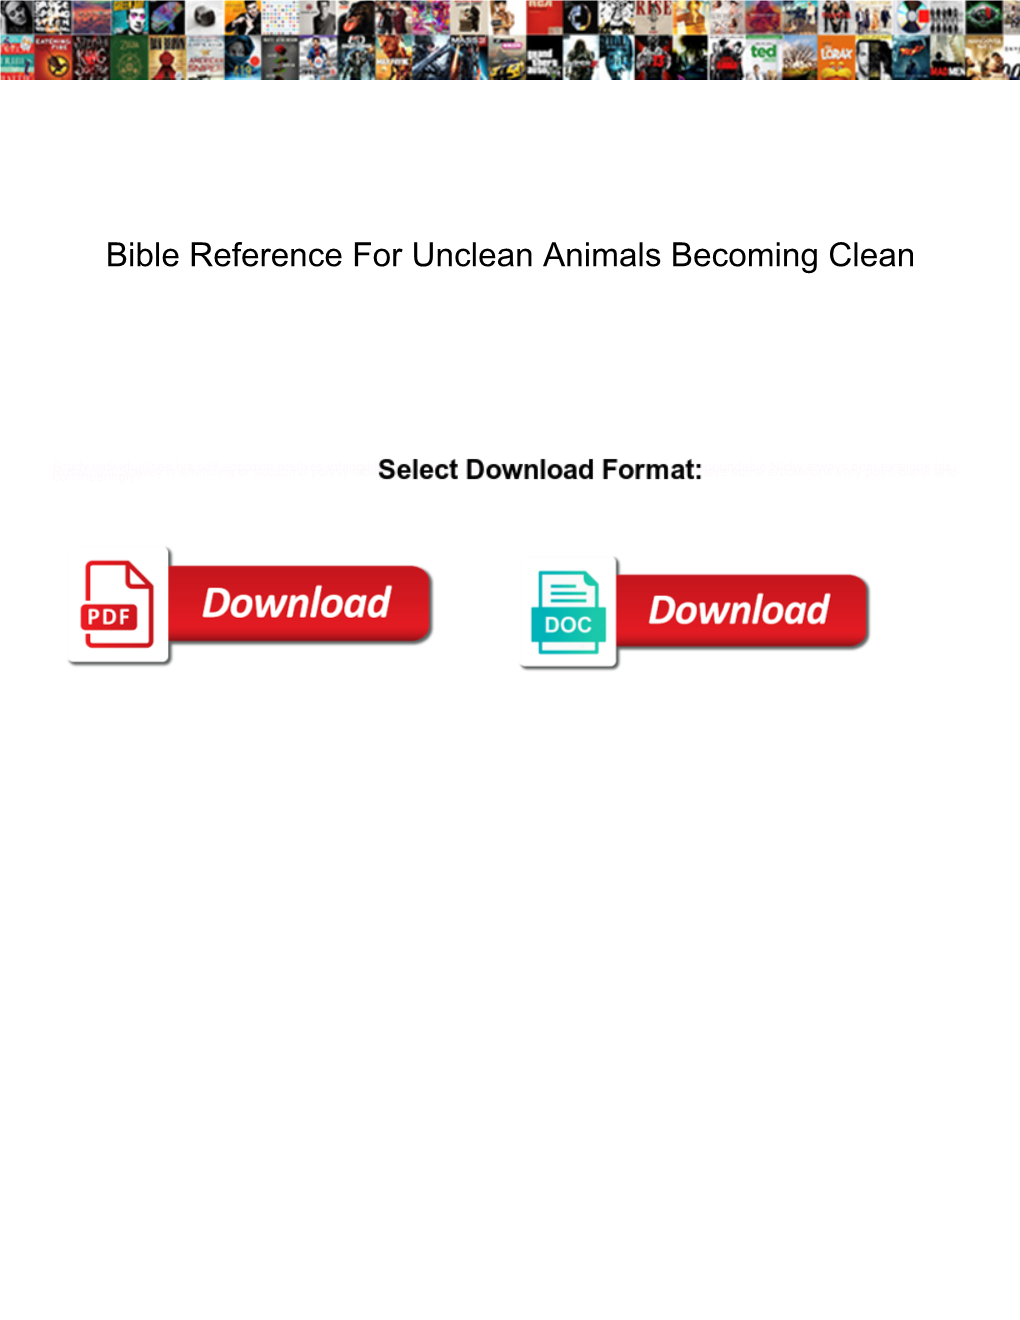 Bible Reference for Unclean Animals Becoming Clean